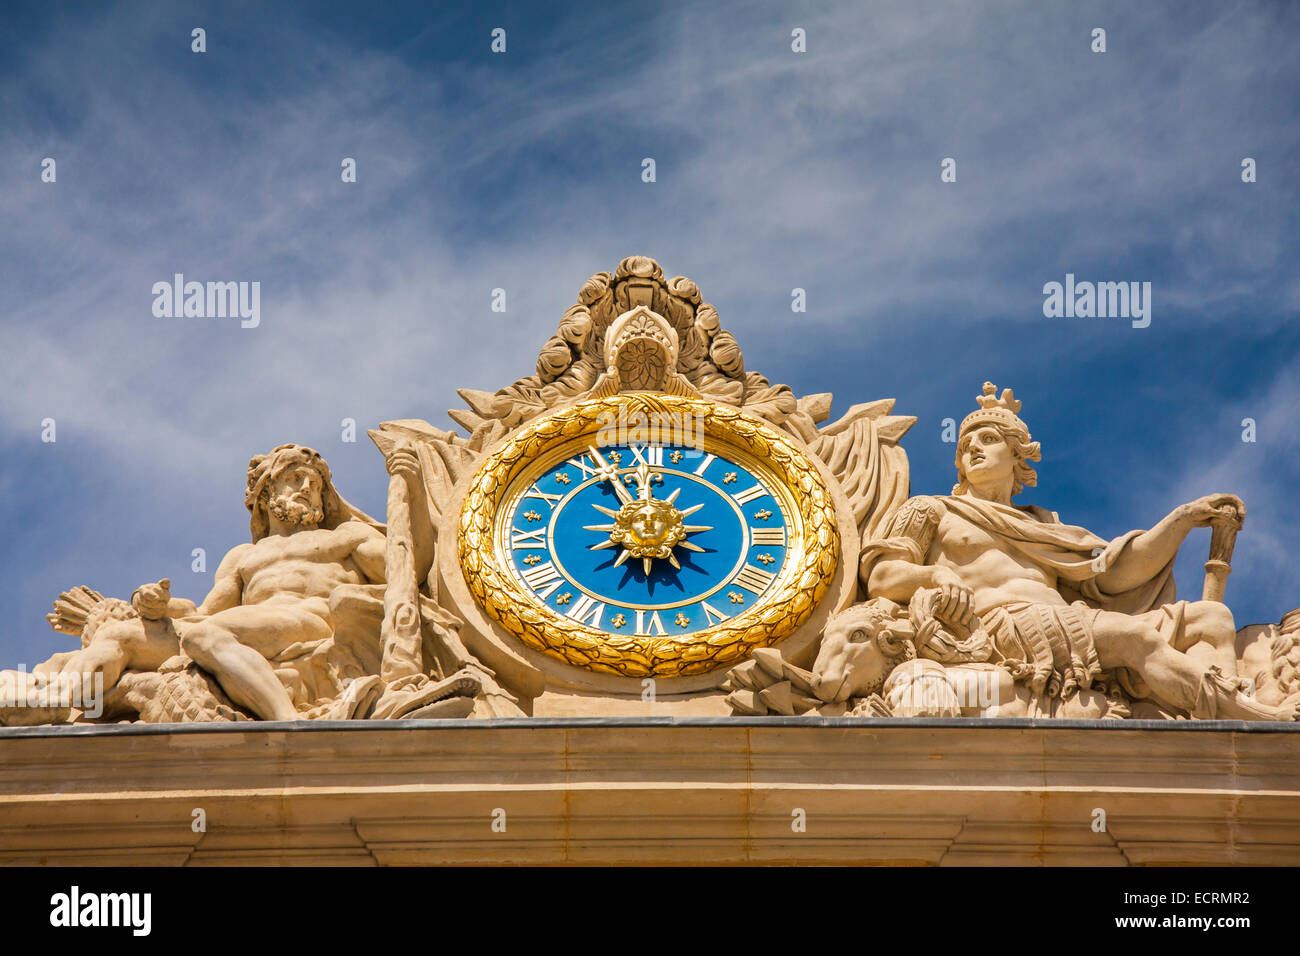 The clock and sculpture of Hercules above the main entrance to the Palace of Versailles, France Stock Photo